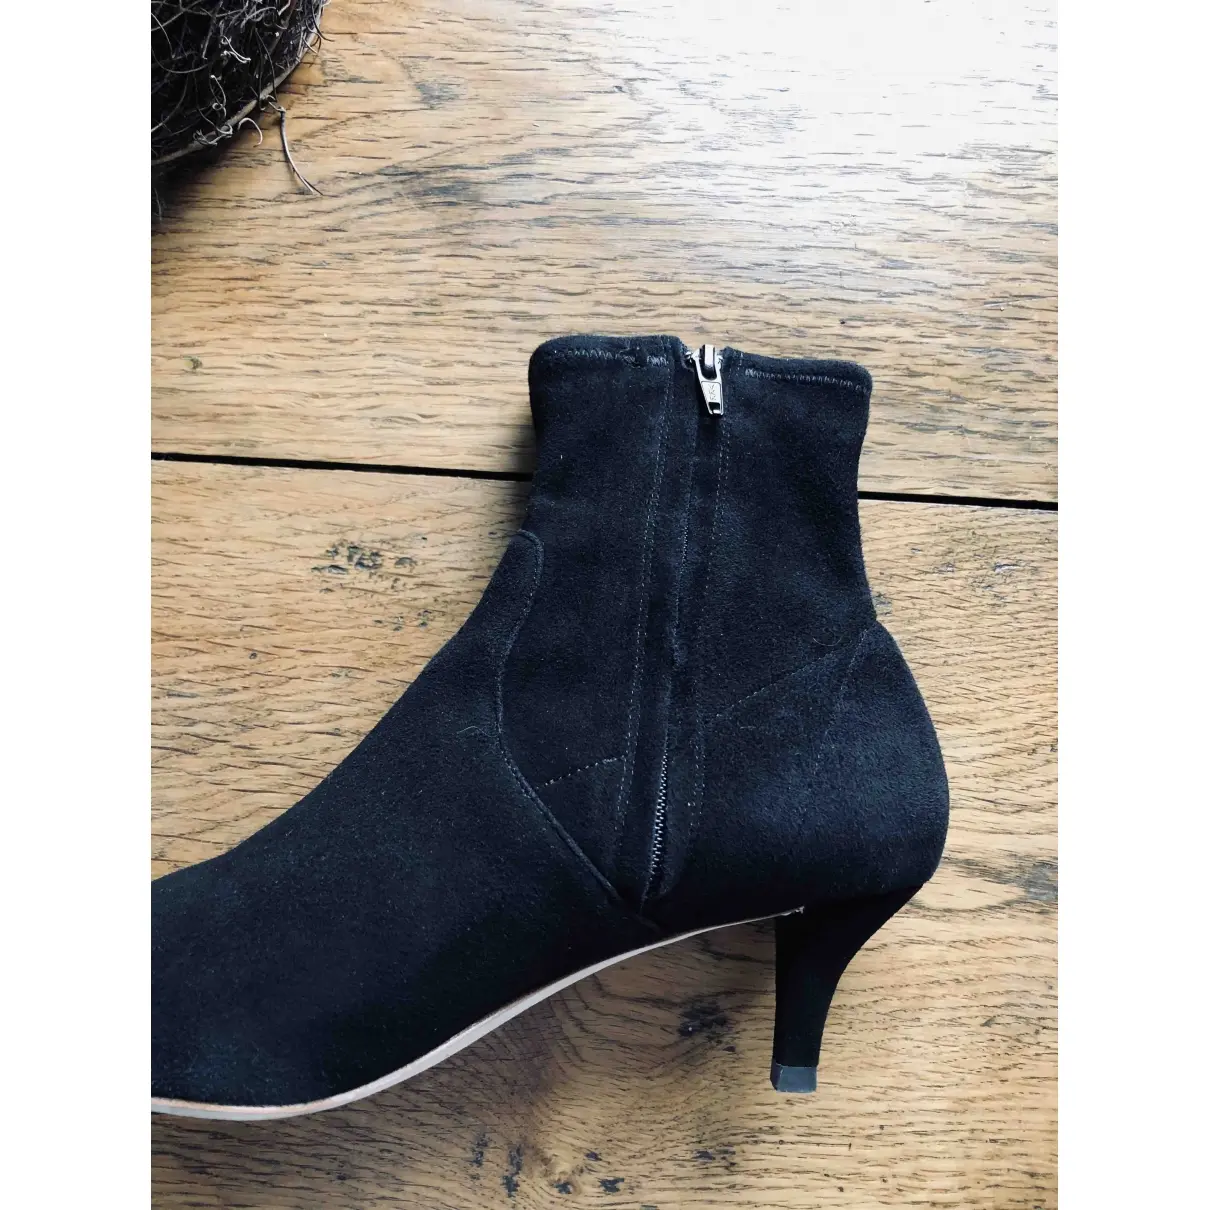 Loeffler Randall Ankle boots for sale